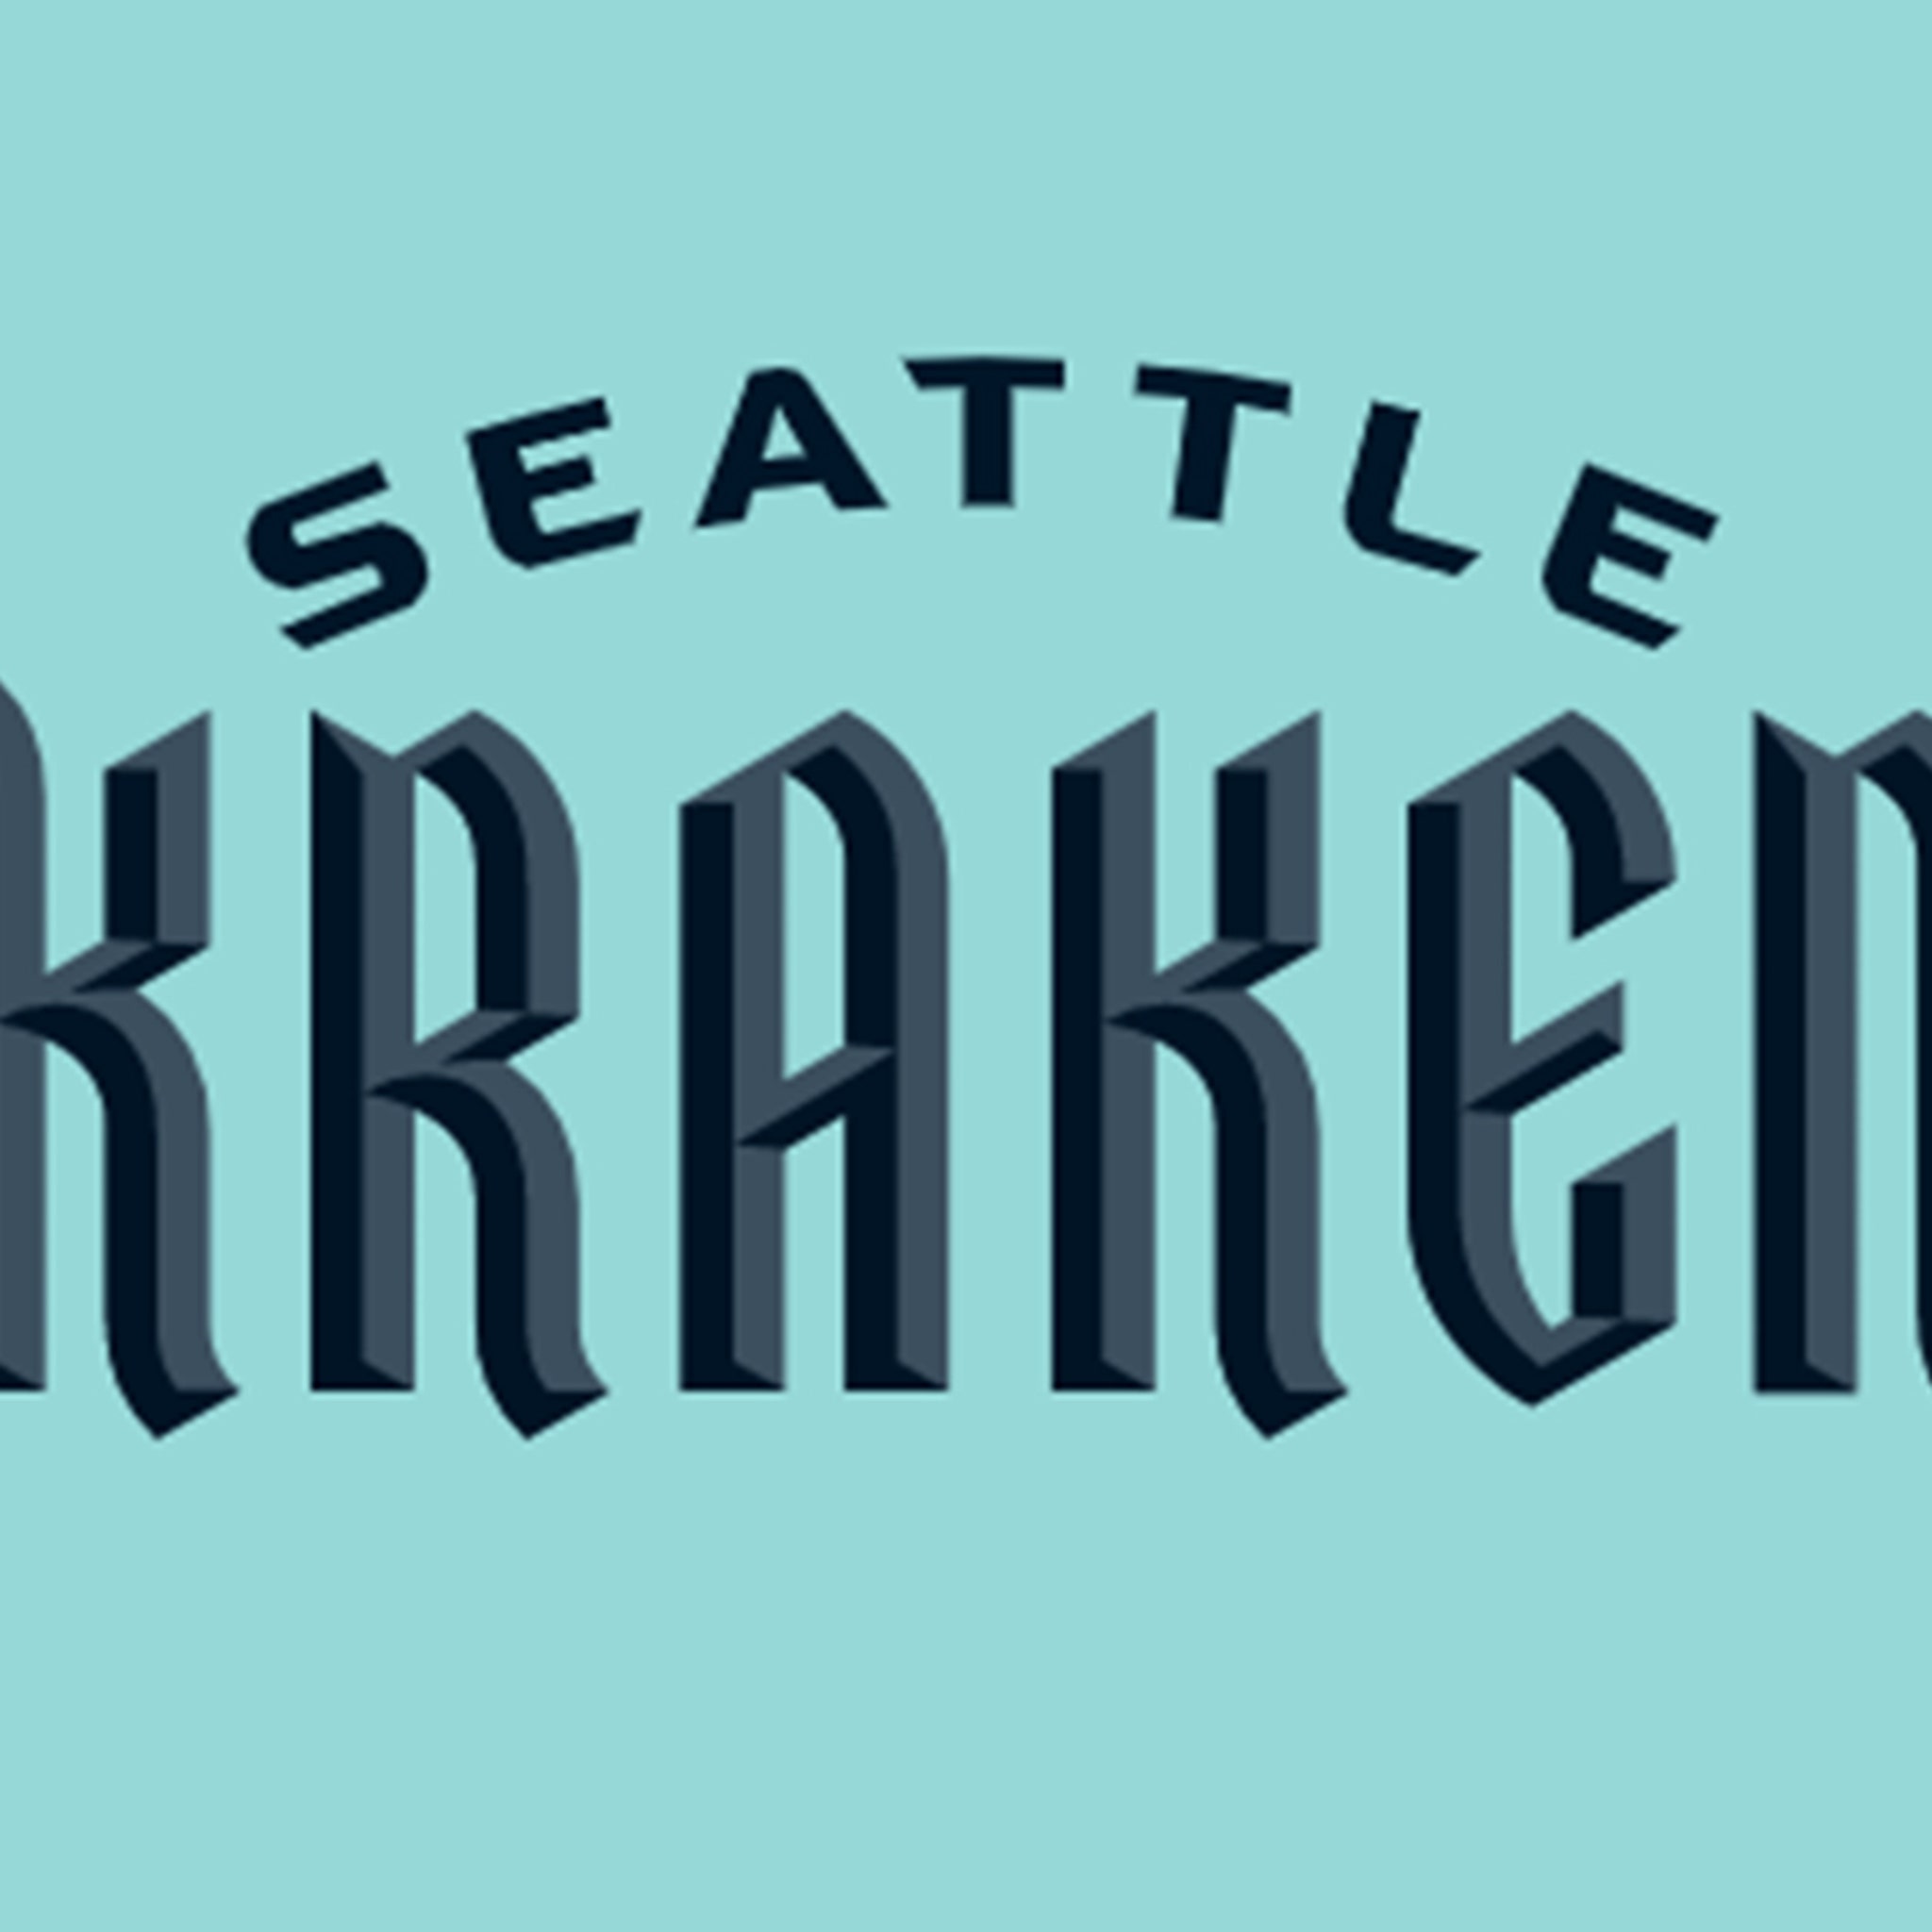 Congratulations to the Seattle Kraken on the team name and brand